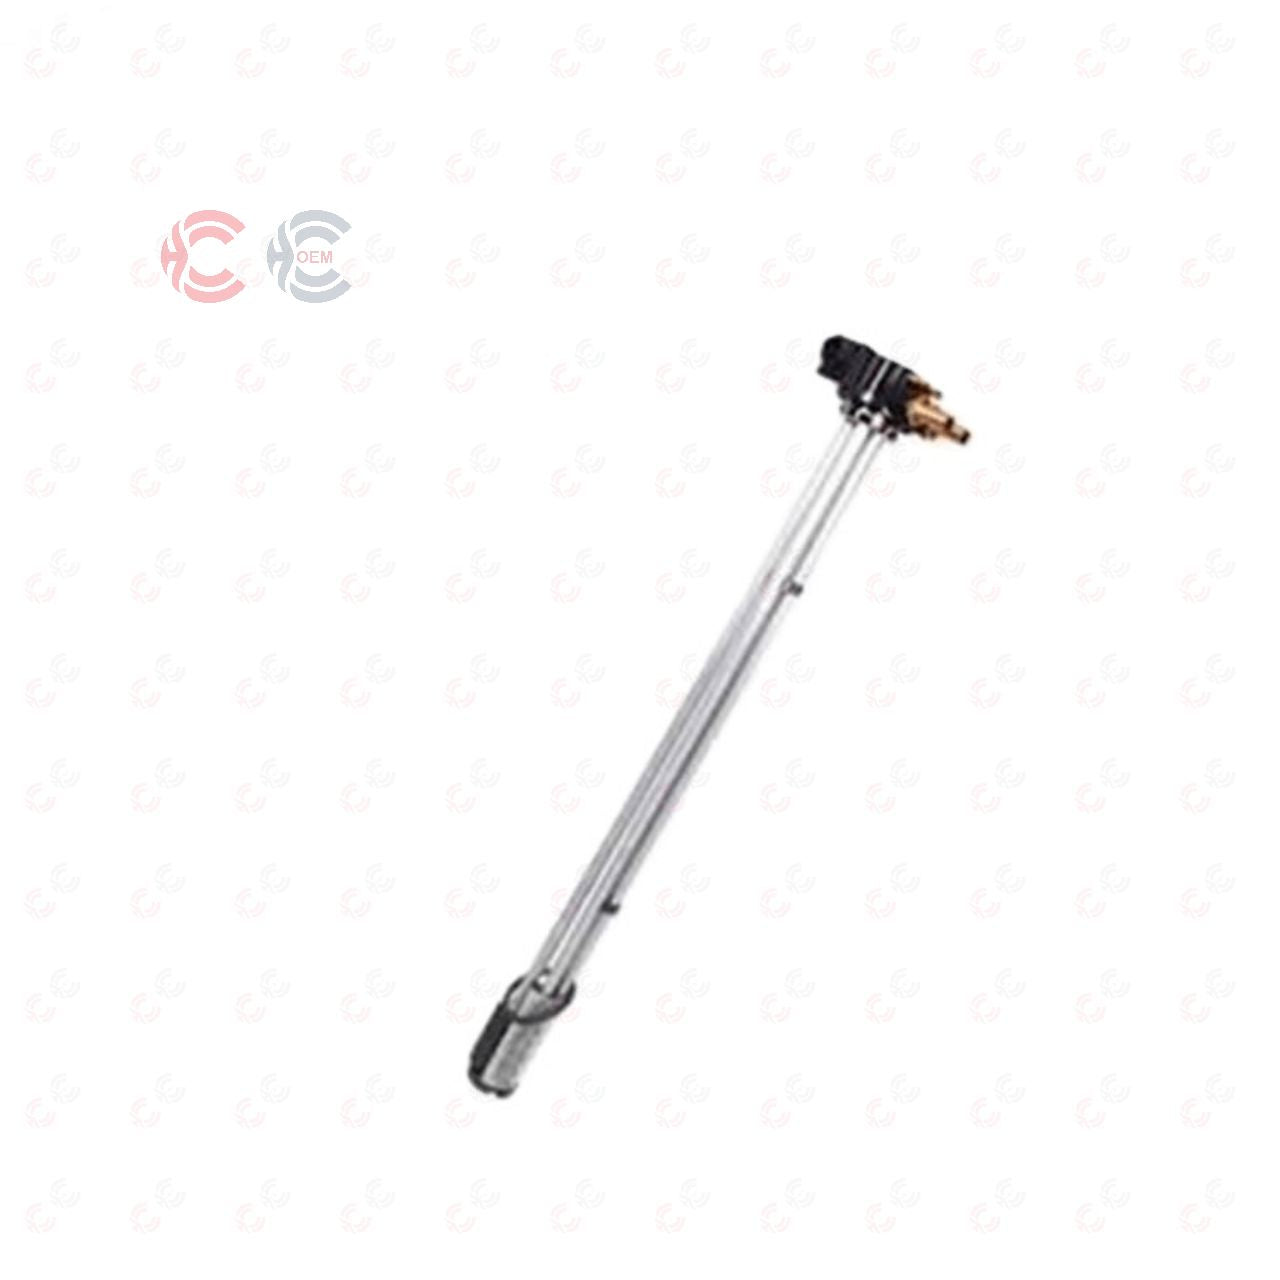 OEM: 272036005Material: ABS metalColor: Black GoldenOrigin: Made in ChinaWeight: 1000gPacking List: 1* Fuel Level Sensor More ServiceWe can provide OEM Manufacturing serviceWe can Be your one-step solution for Auto PartsWe can provide technical scheme for you Feel Free to Contact Us, we will get back to you as soon as possible.